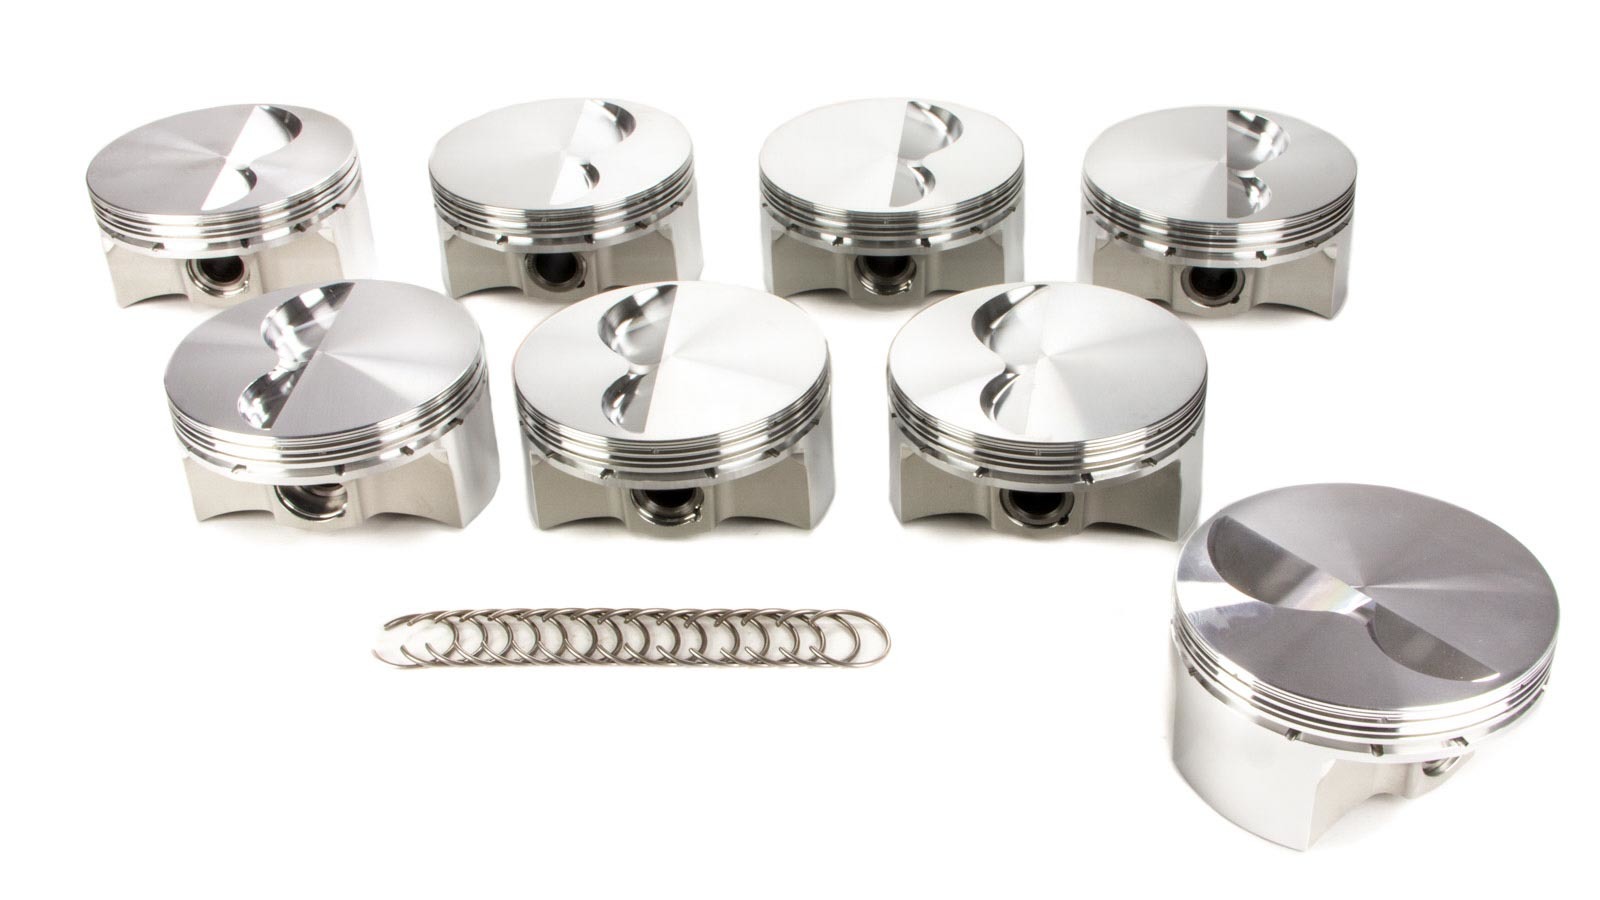 JE Pistons 258029 Piston, F.S.R. Tour Series GP, Forged, 4.035 in Bore, 0.043 in x 0.043 in x 3.0 mm Ring Grooves, Minus 5.00 cc, Small Block Chevy, Set of 8